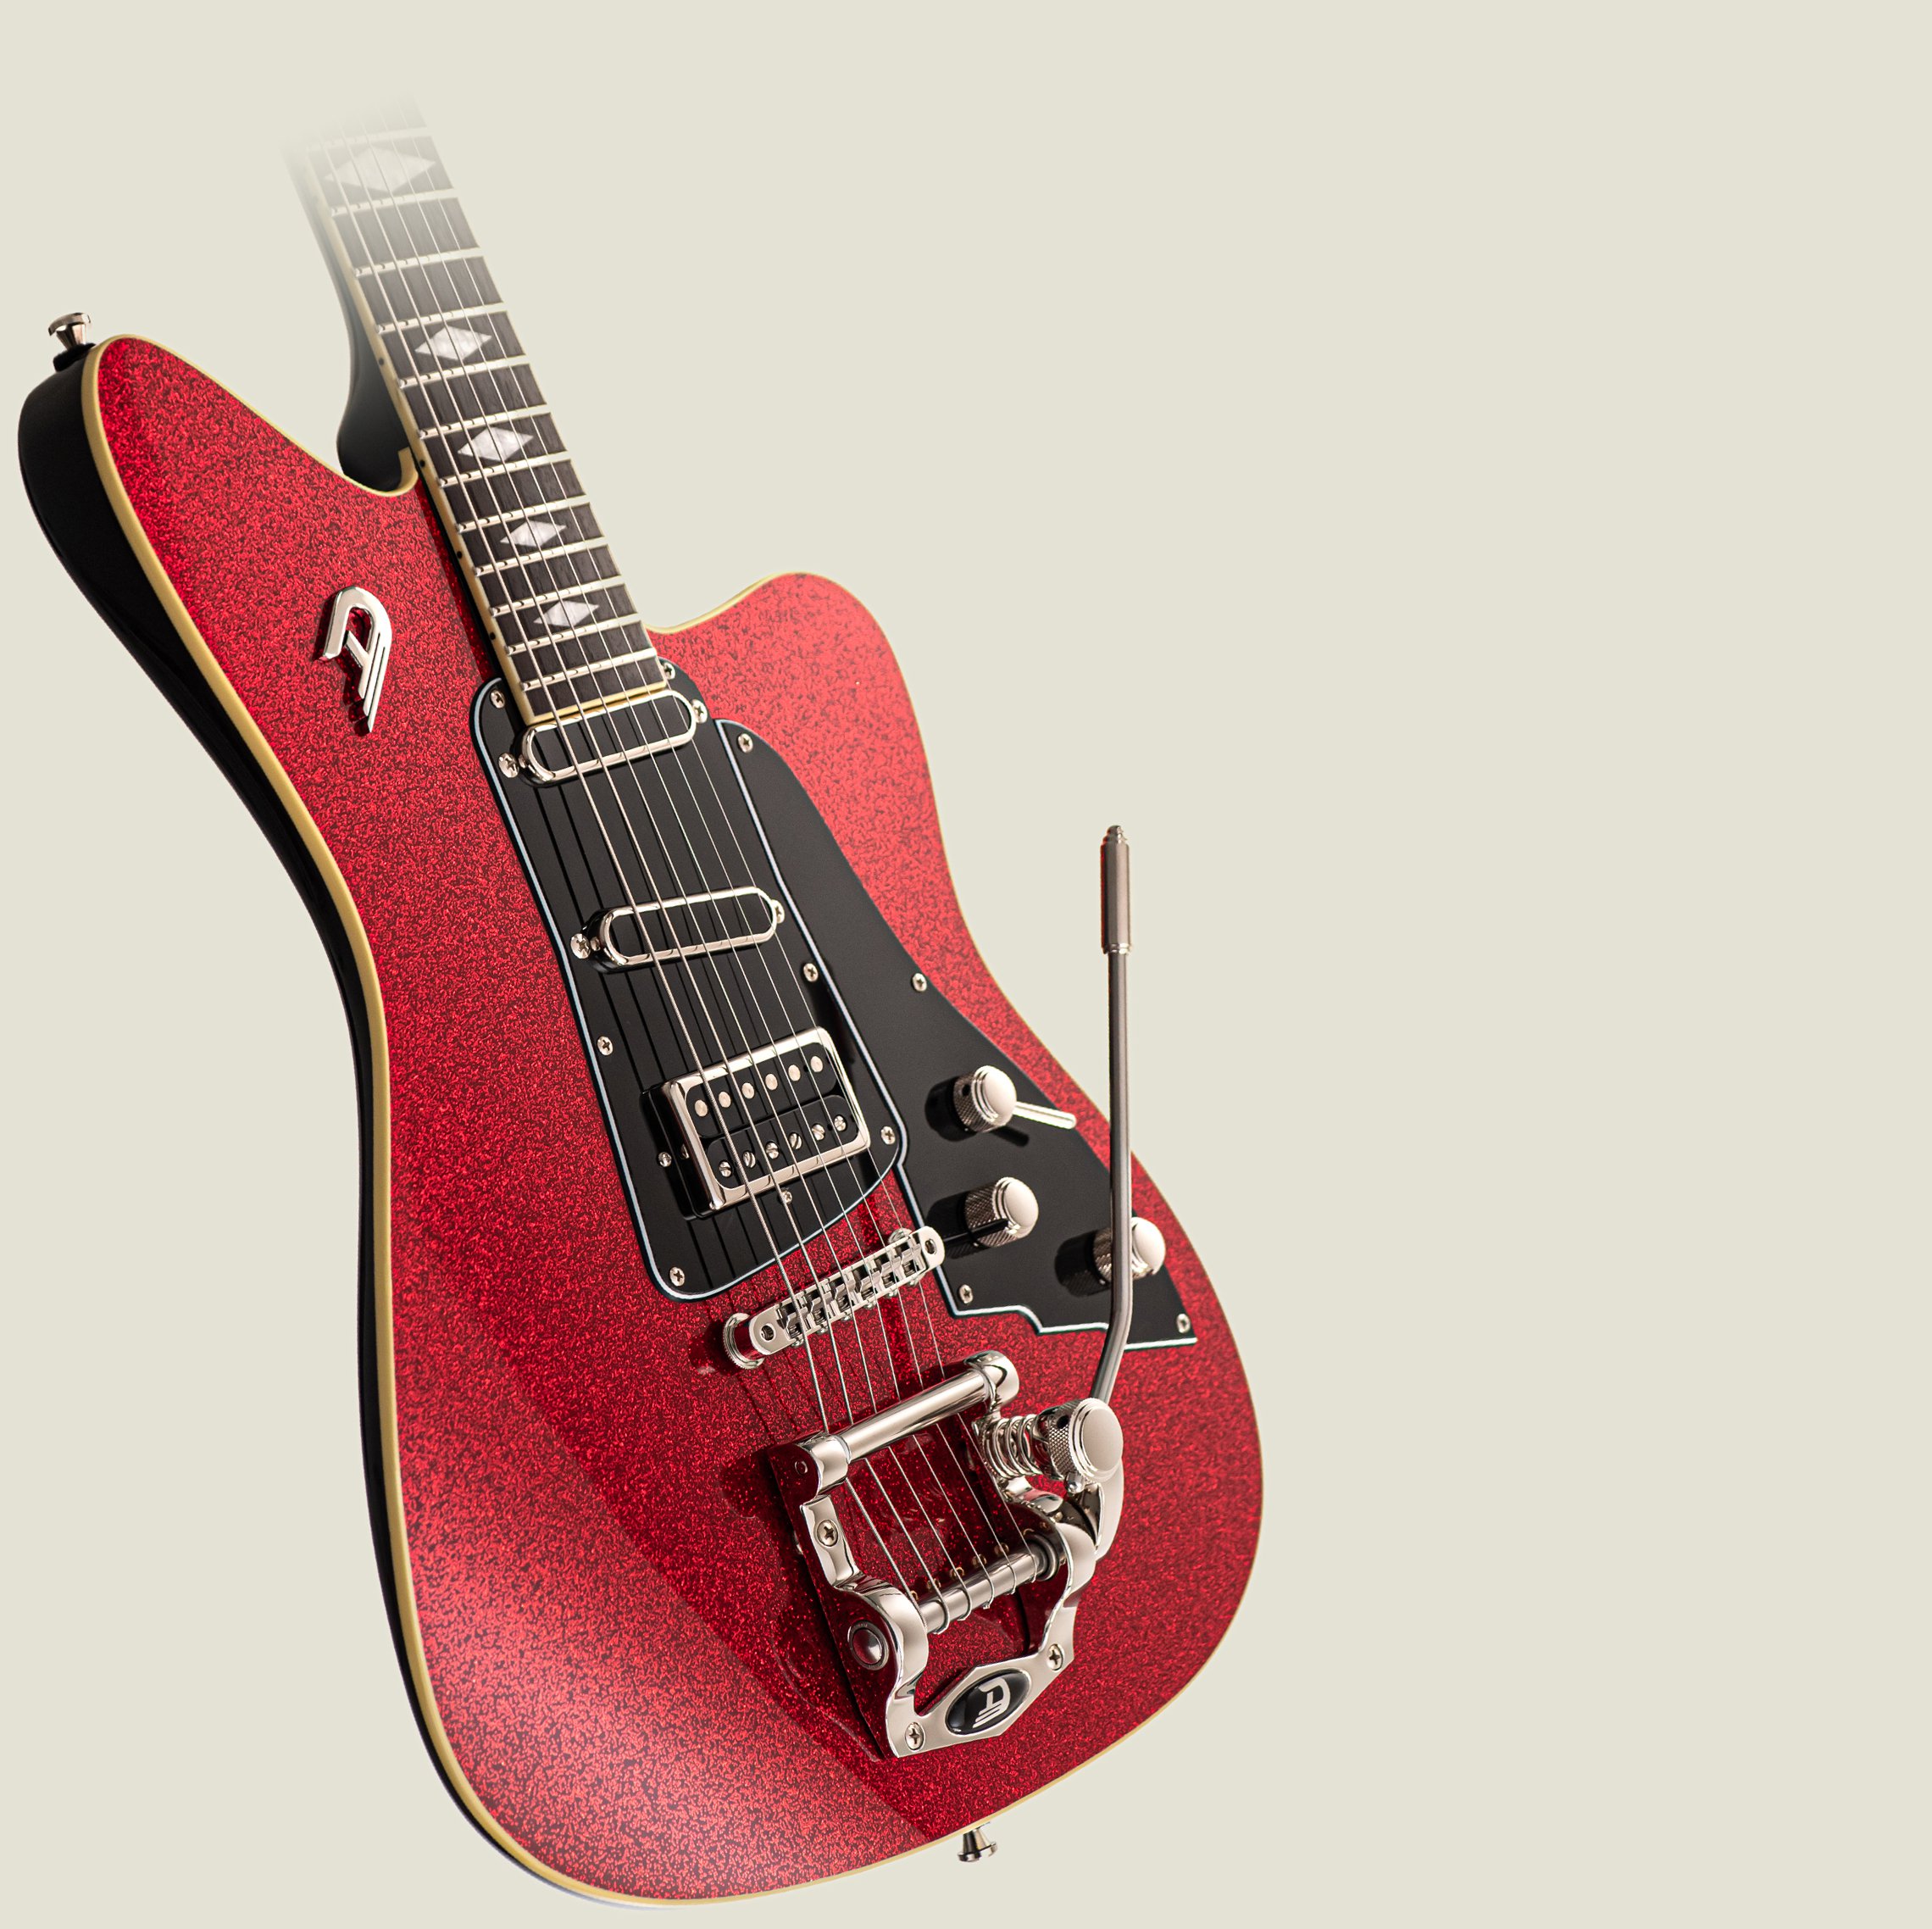 Angled view of the Duesenberg Paloma in RedSparkle on a light background